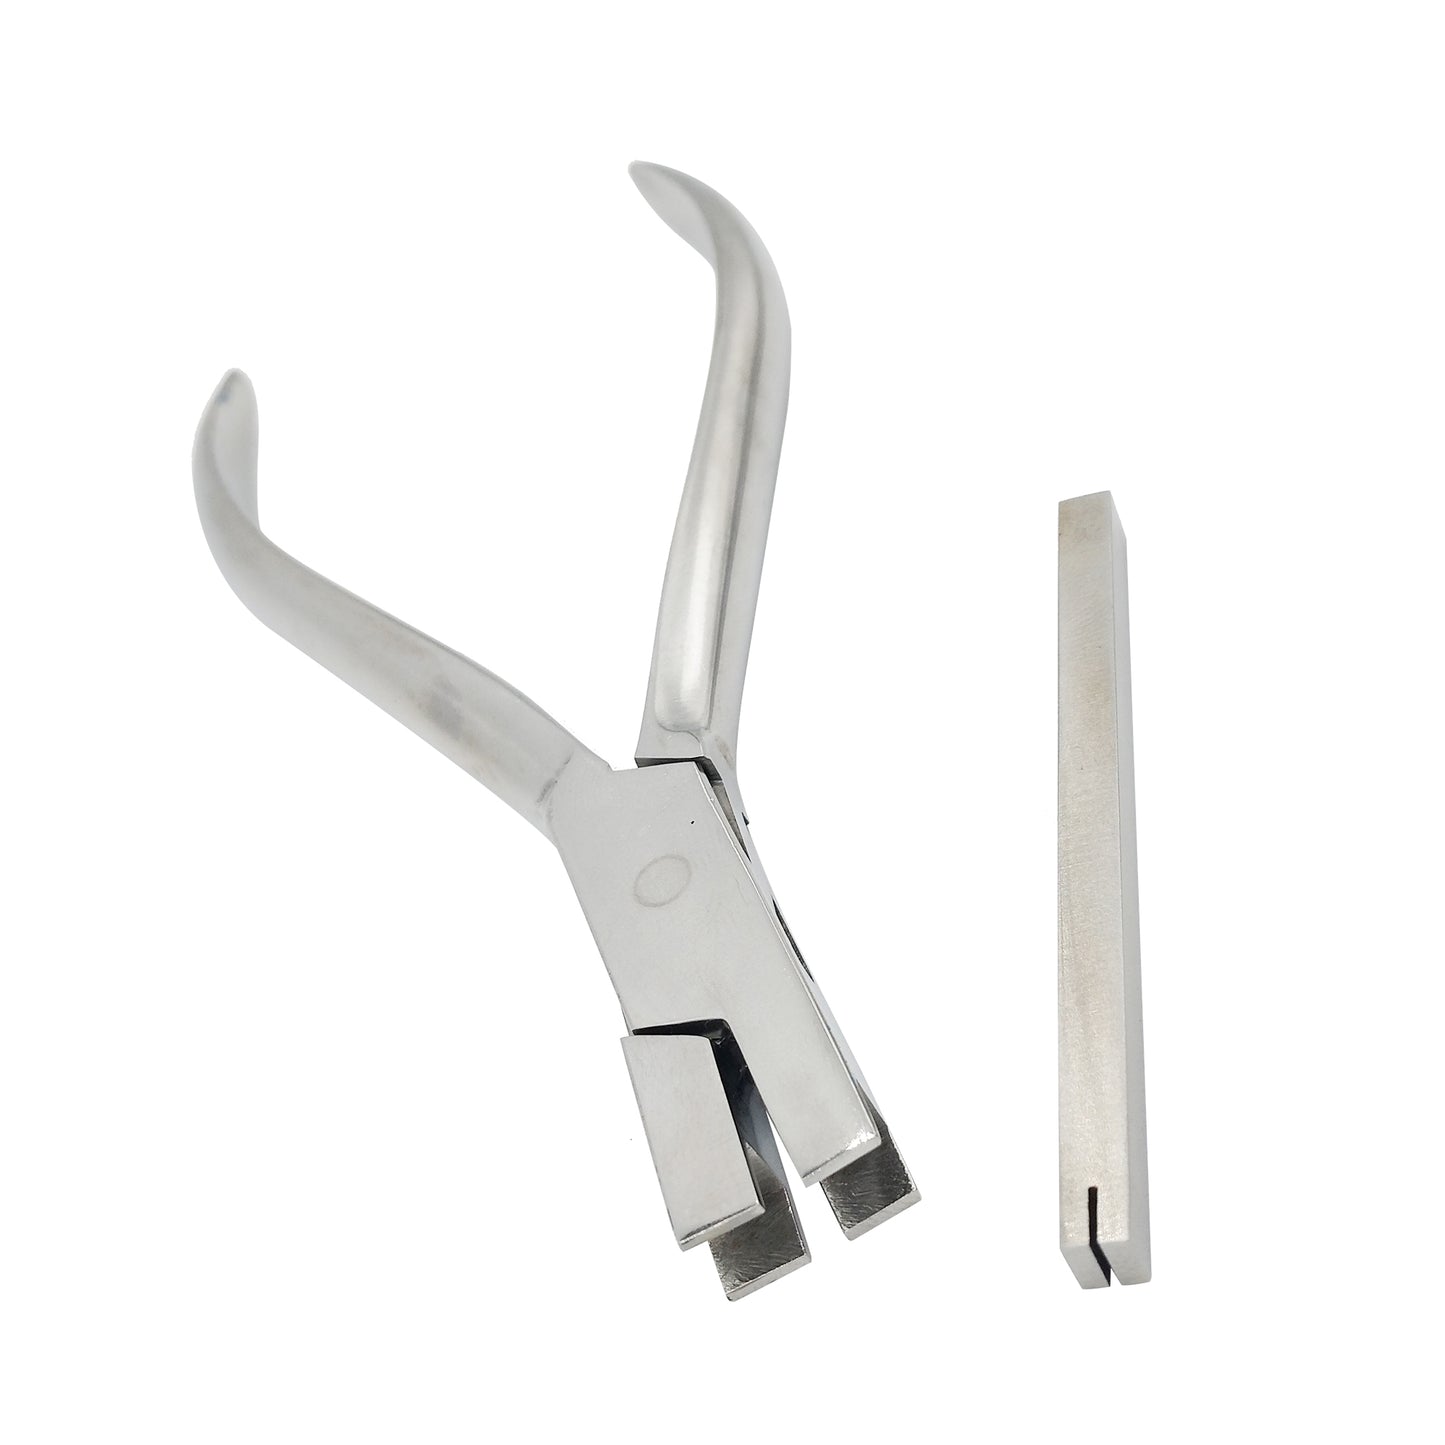 Operative Stainless Steel forceps Dental Orthodontic Wire Bending Cutter Pliers